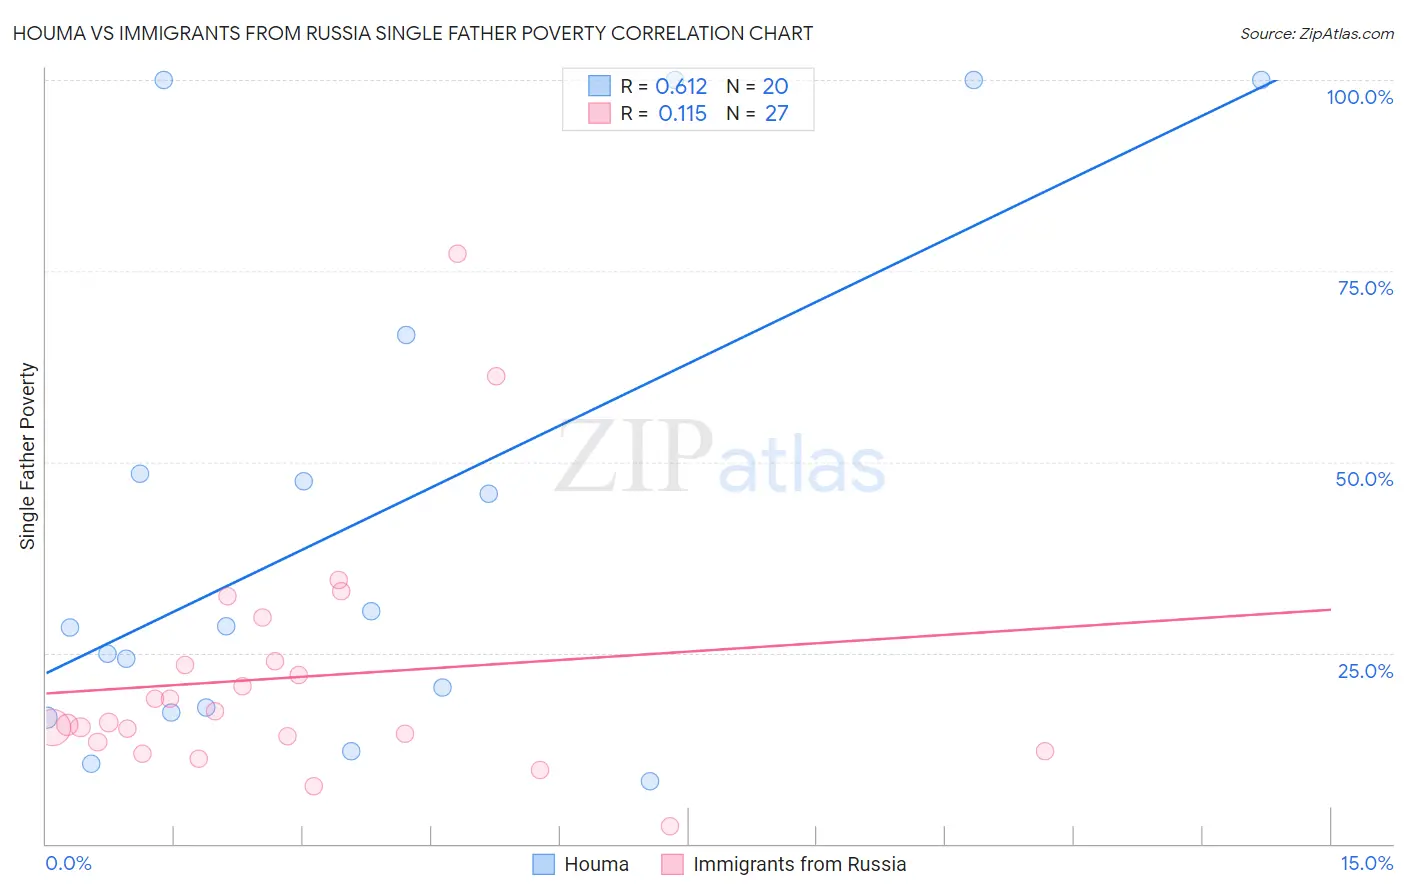 Houma vs Immigrants from Russia Single Father Poverty